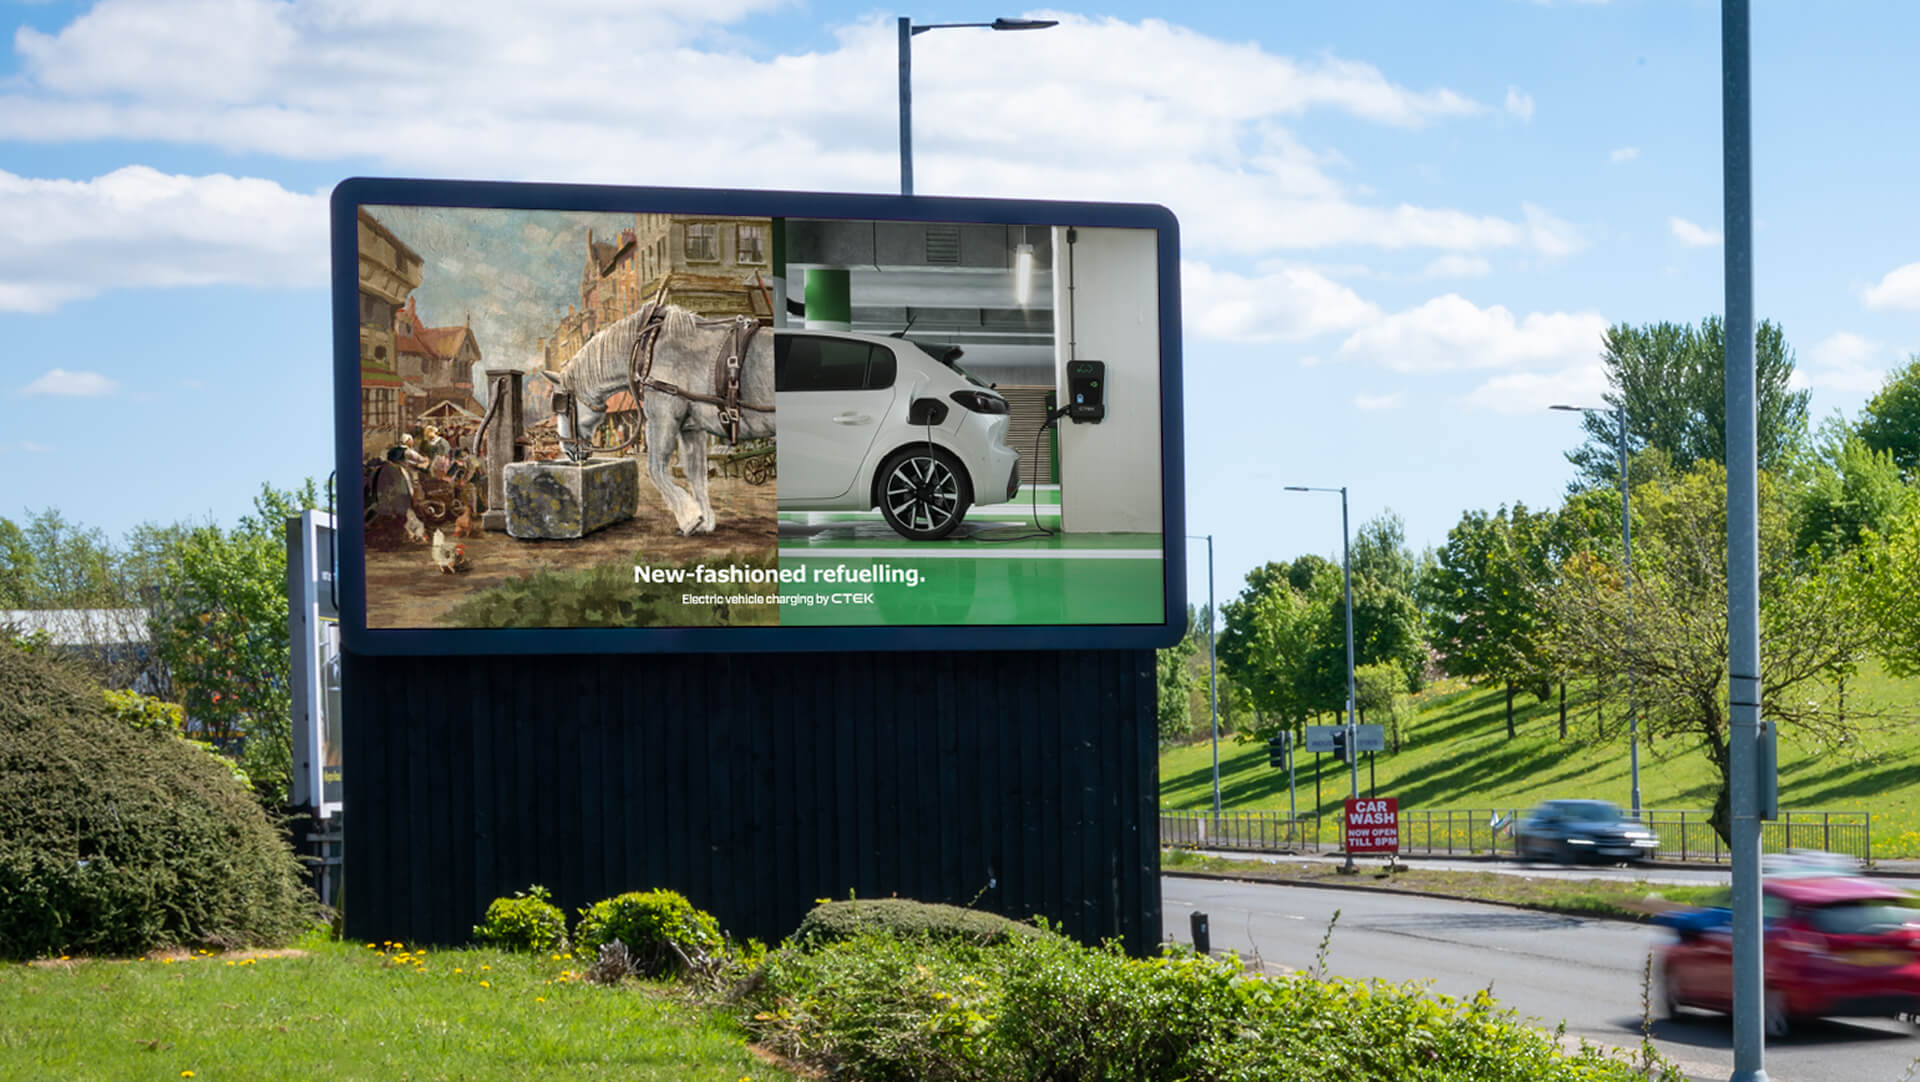 CTEK Electric Car Charging - EV Chargers - Ad Campaign by Mellor&Smith - Paul Mellor